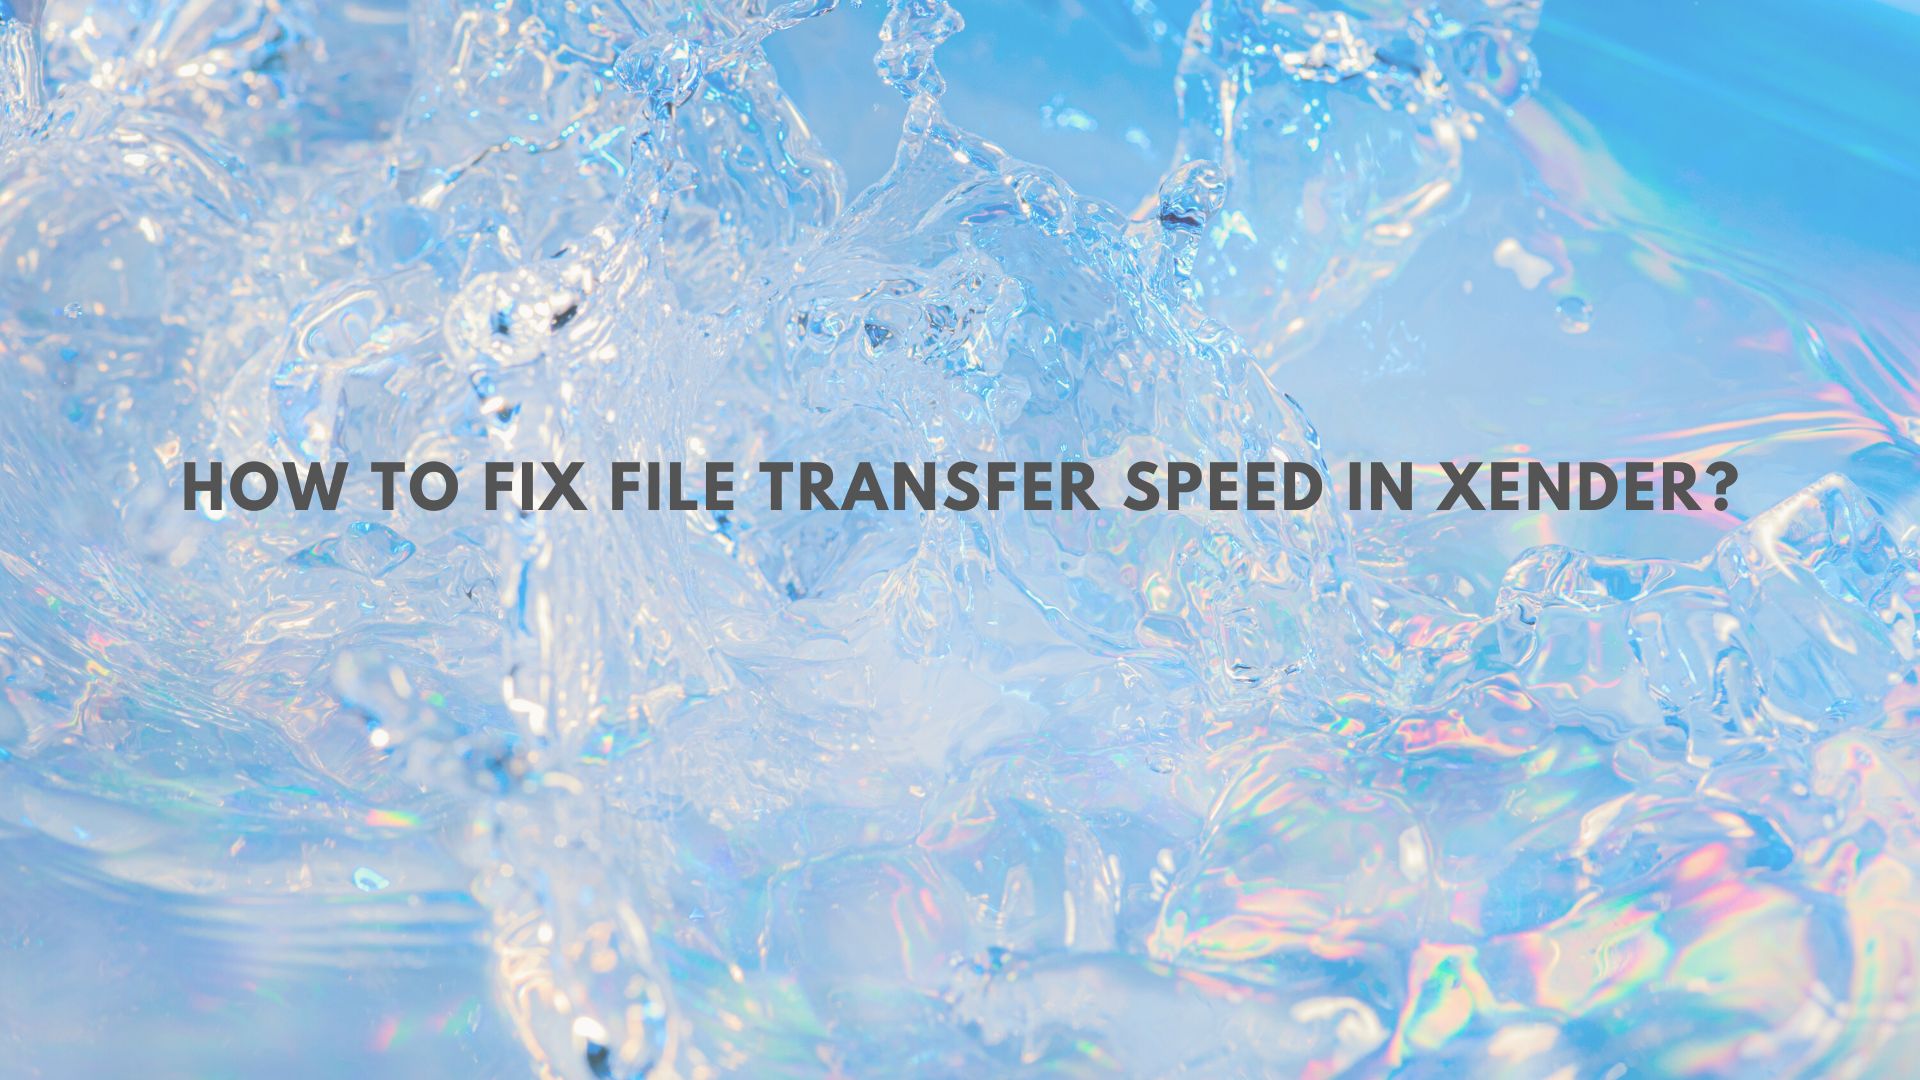 How to fix file transfer speed in Xender